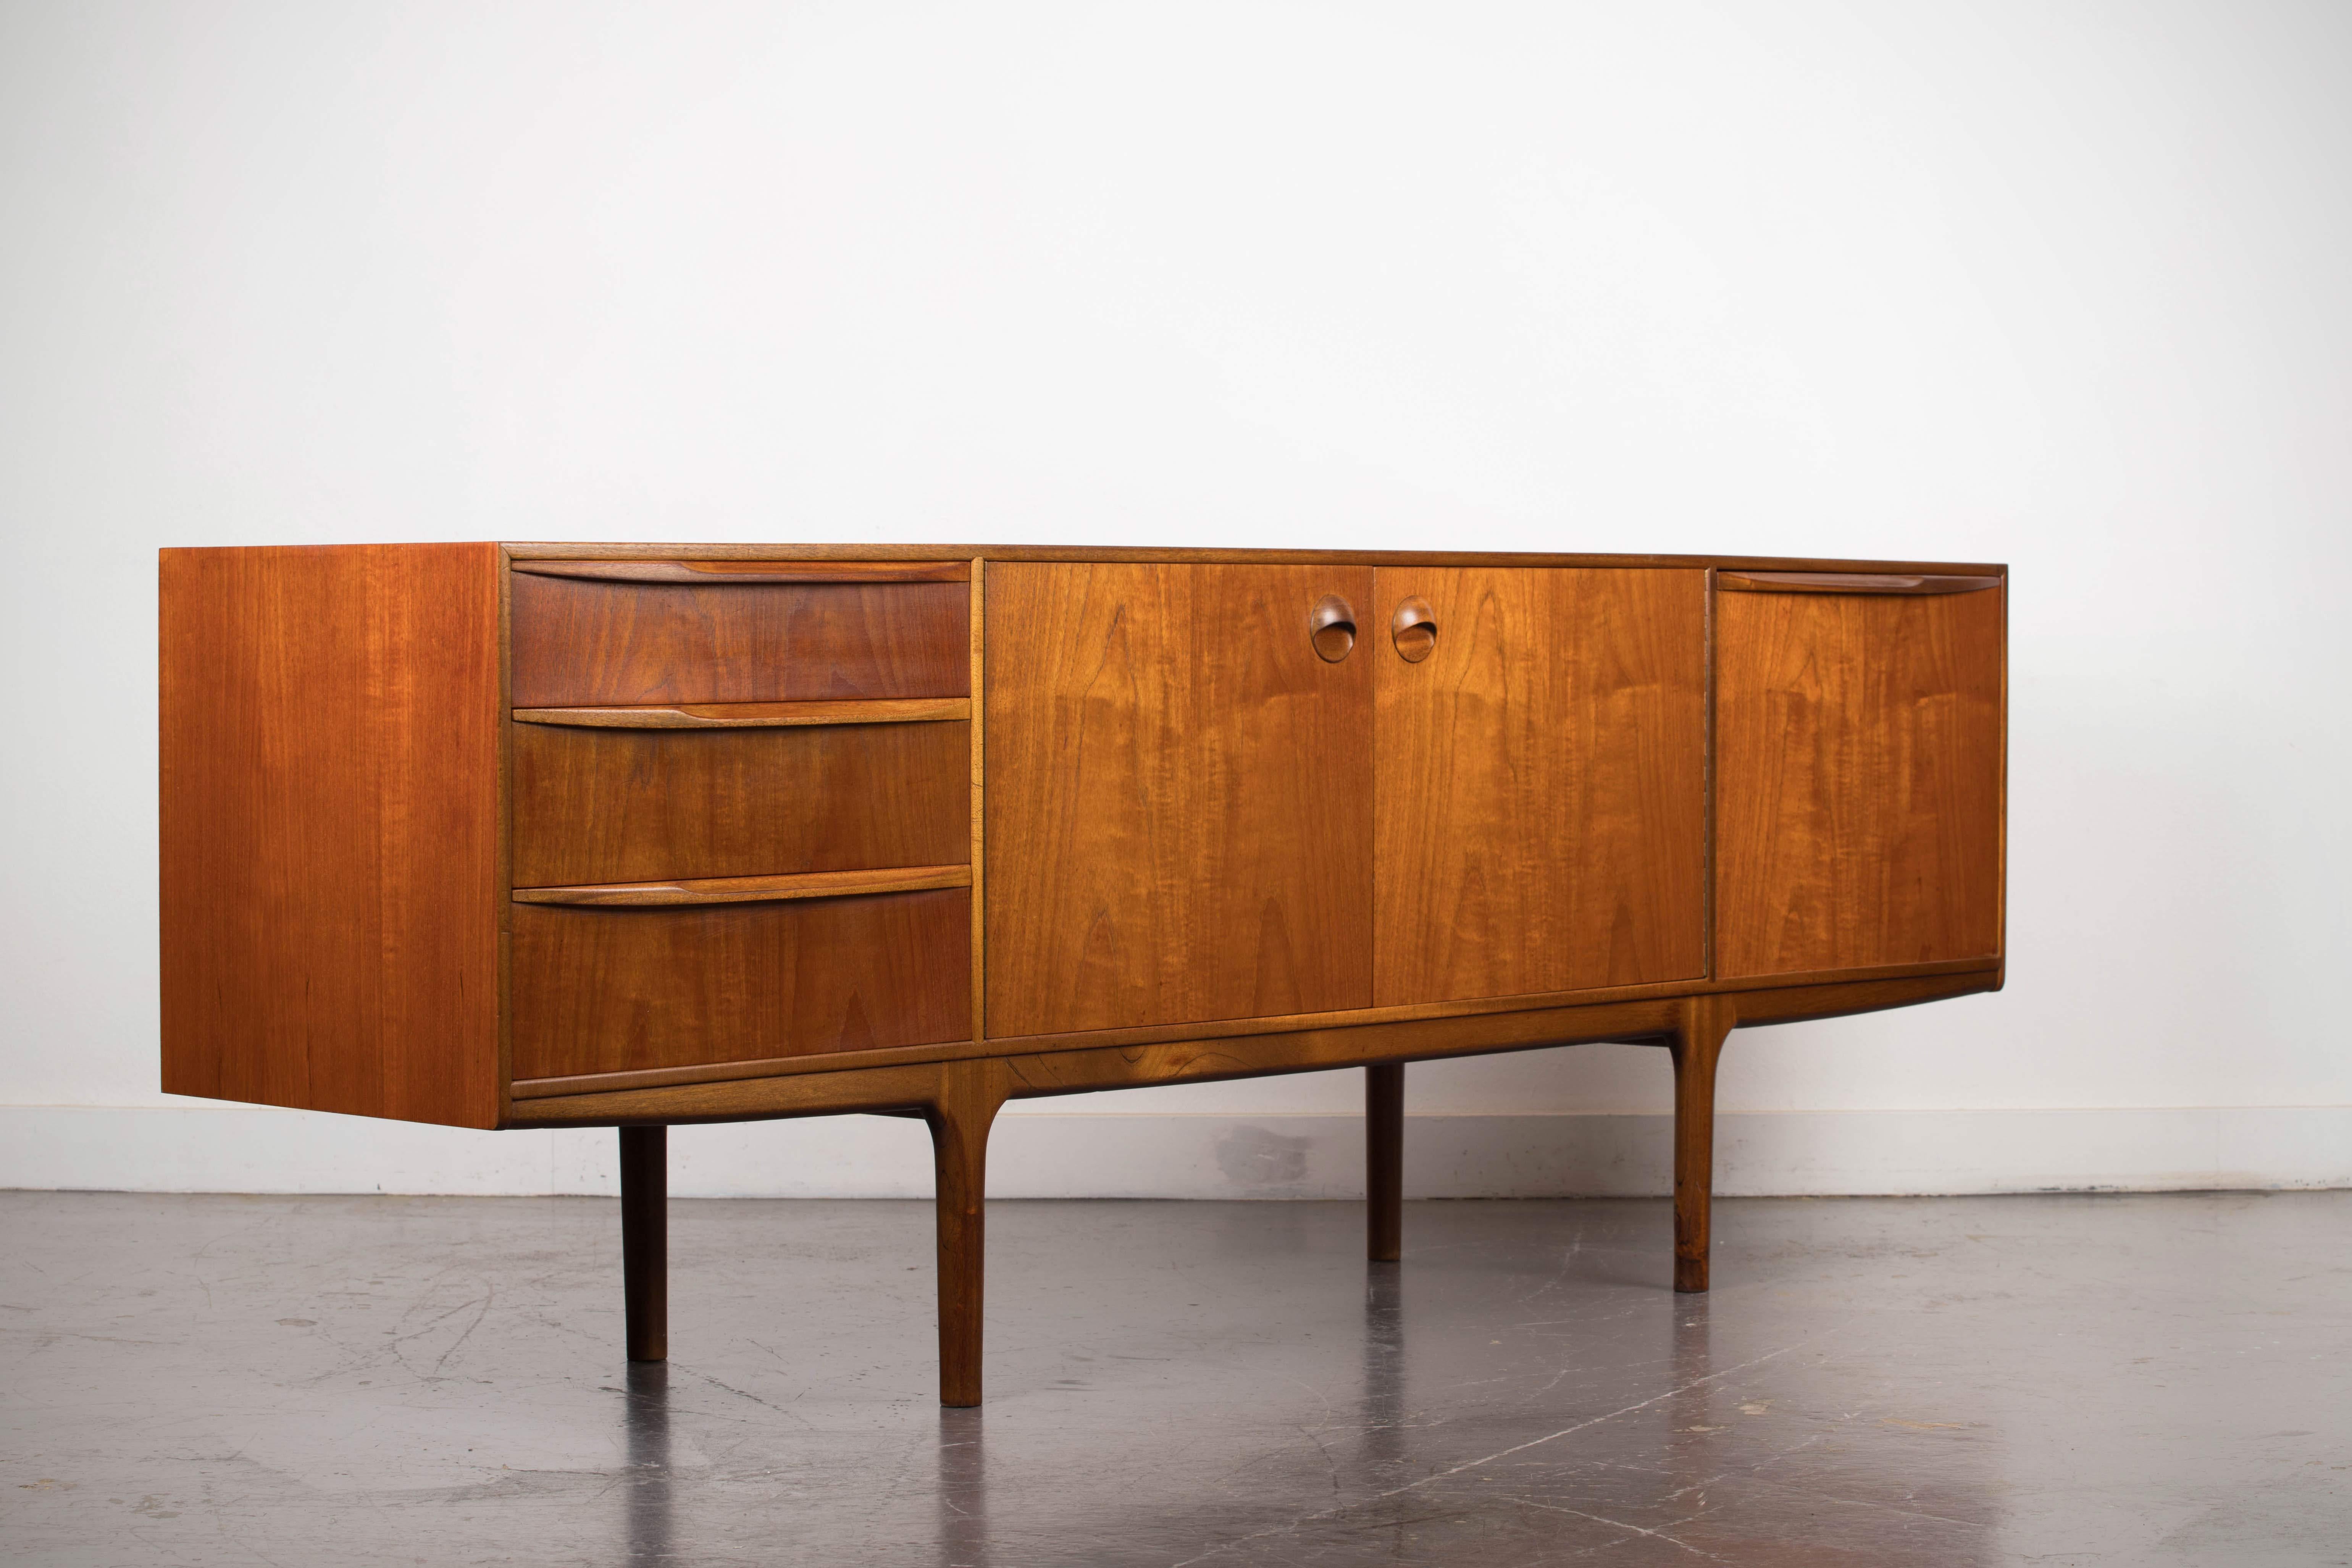 Stunning and beautifully crafted teak sideboard designed by Tom Robertson and manufactured by A.H. McIntosh of Kirkaldy, Scotland, 1960s. 

A.H. McIntosh created quality furniture which catered to the tastes of progressive 1960s middle class